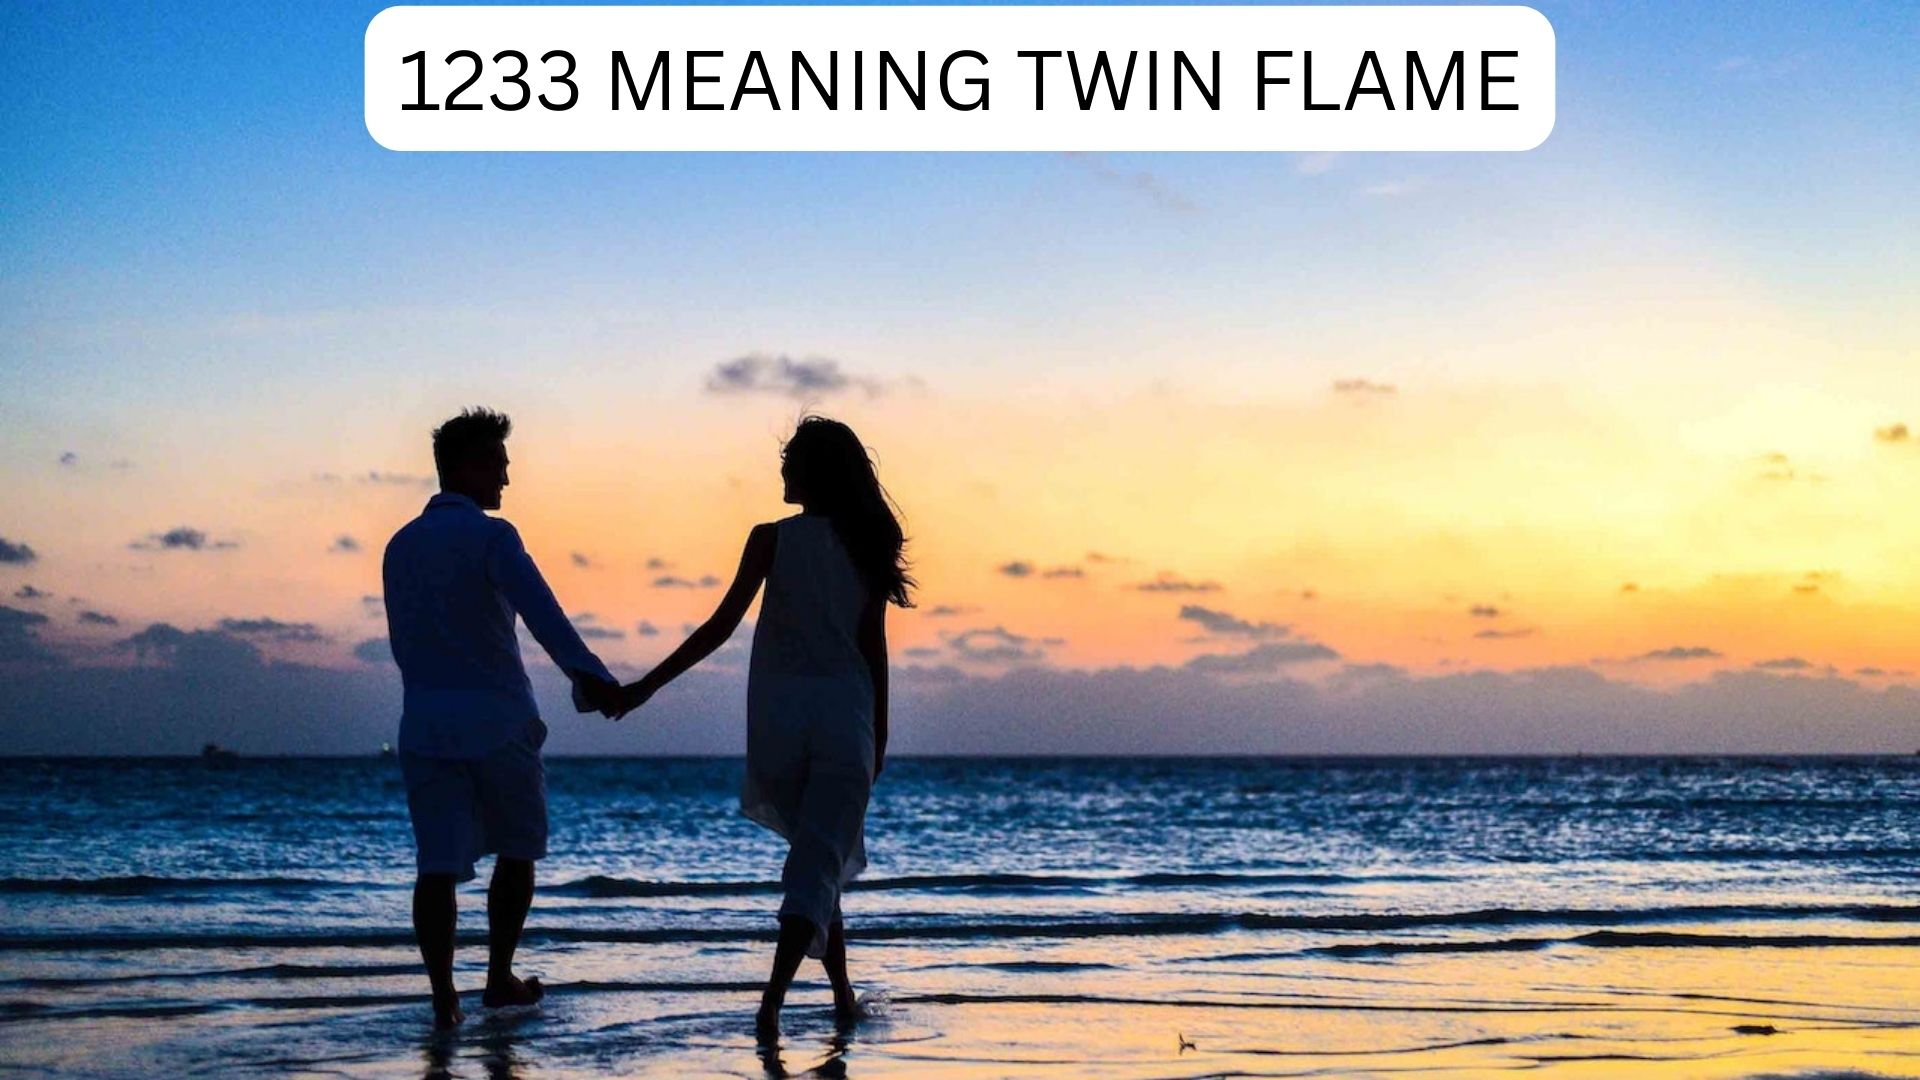 1233 Meaning Twin Flame - The Attributes Of Purity And Joy